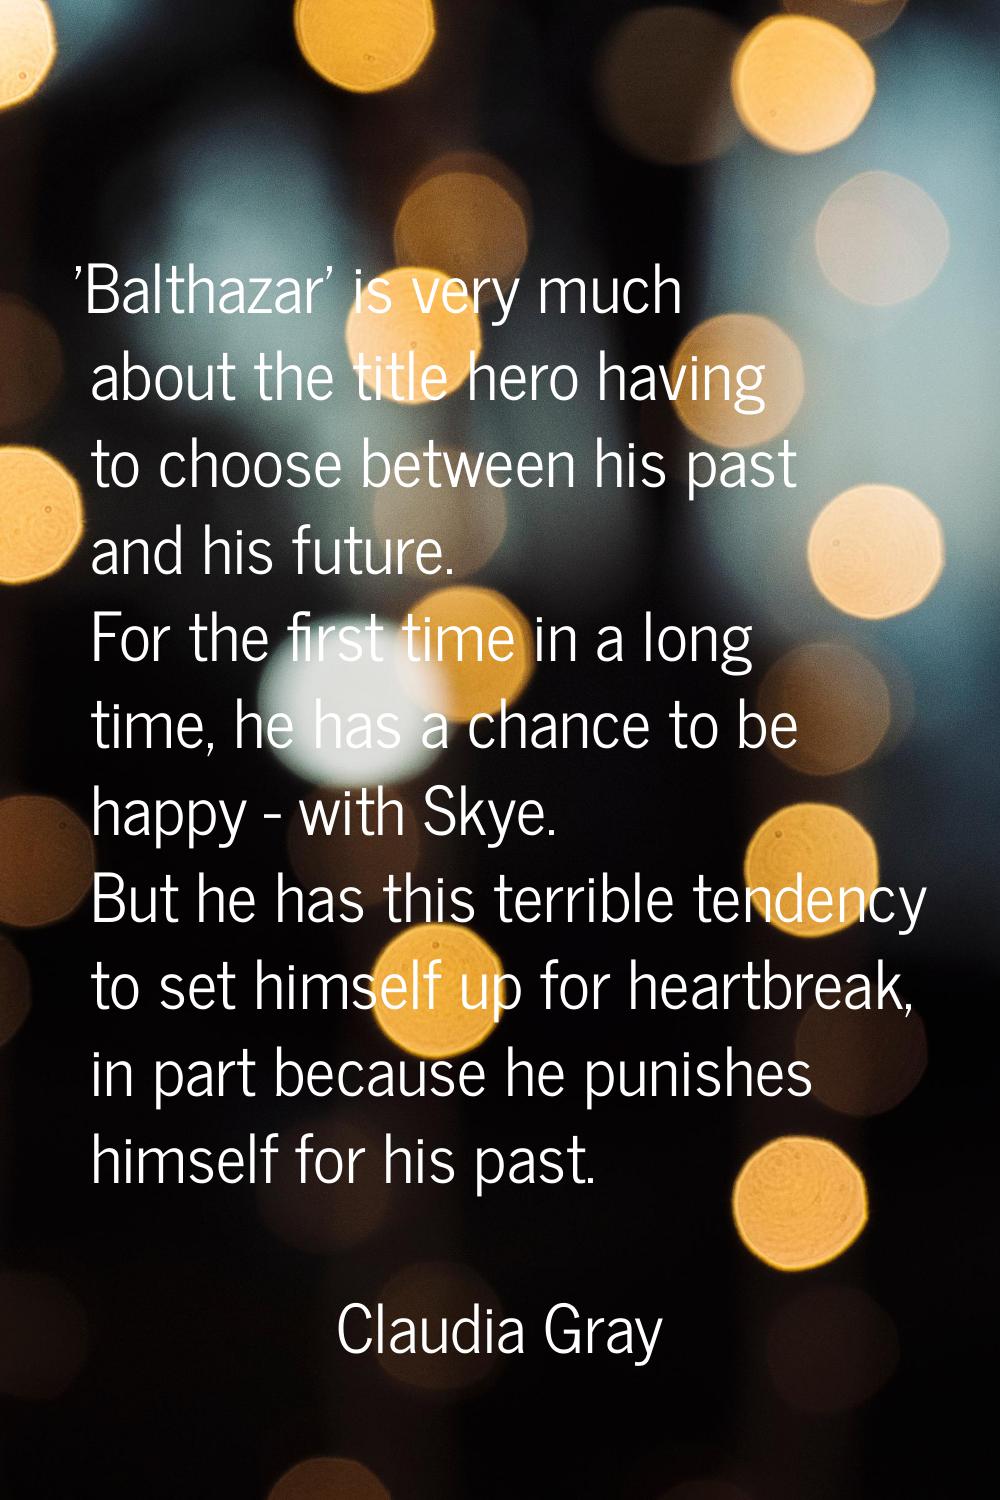 'Balthazar' is very much about the title hero having to choose between his past and his future. For